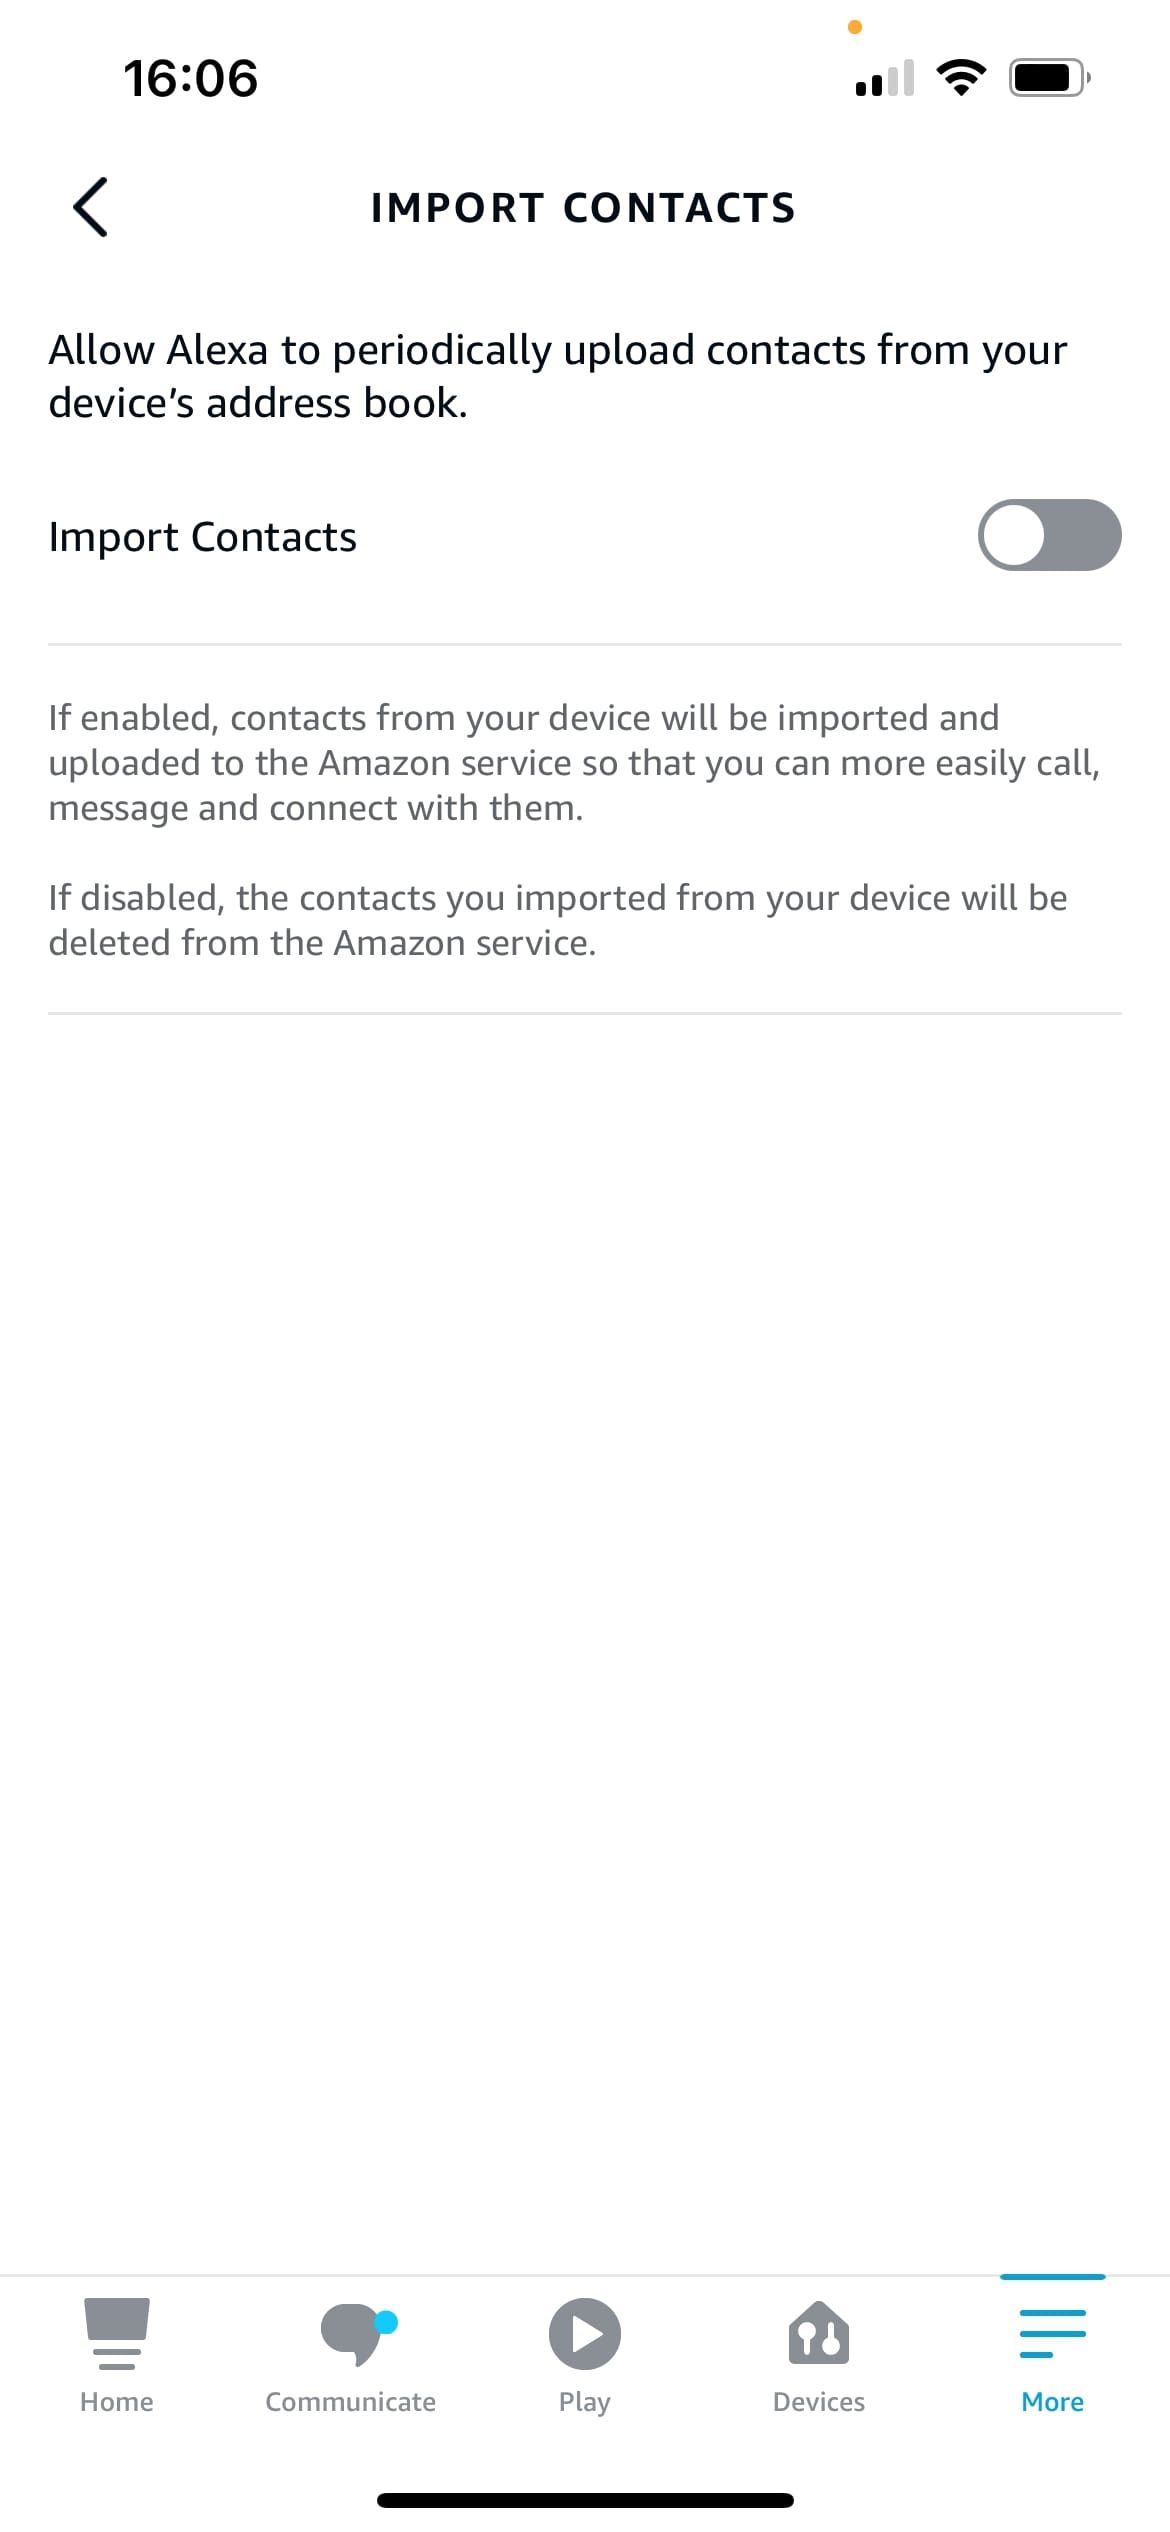 Alexa Import Contacts page